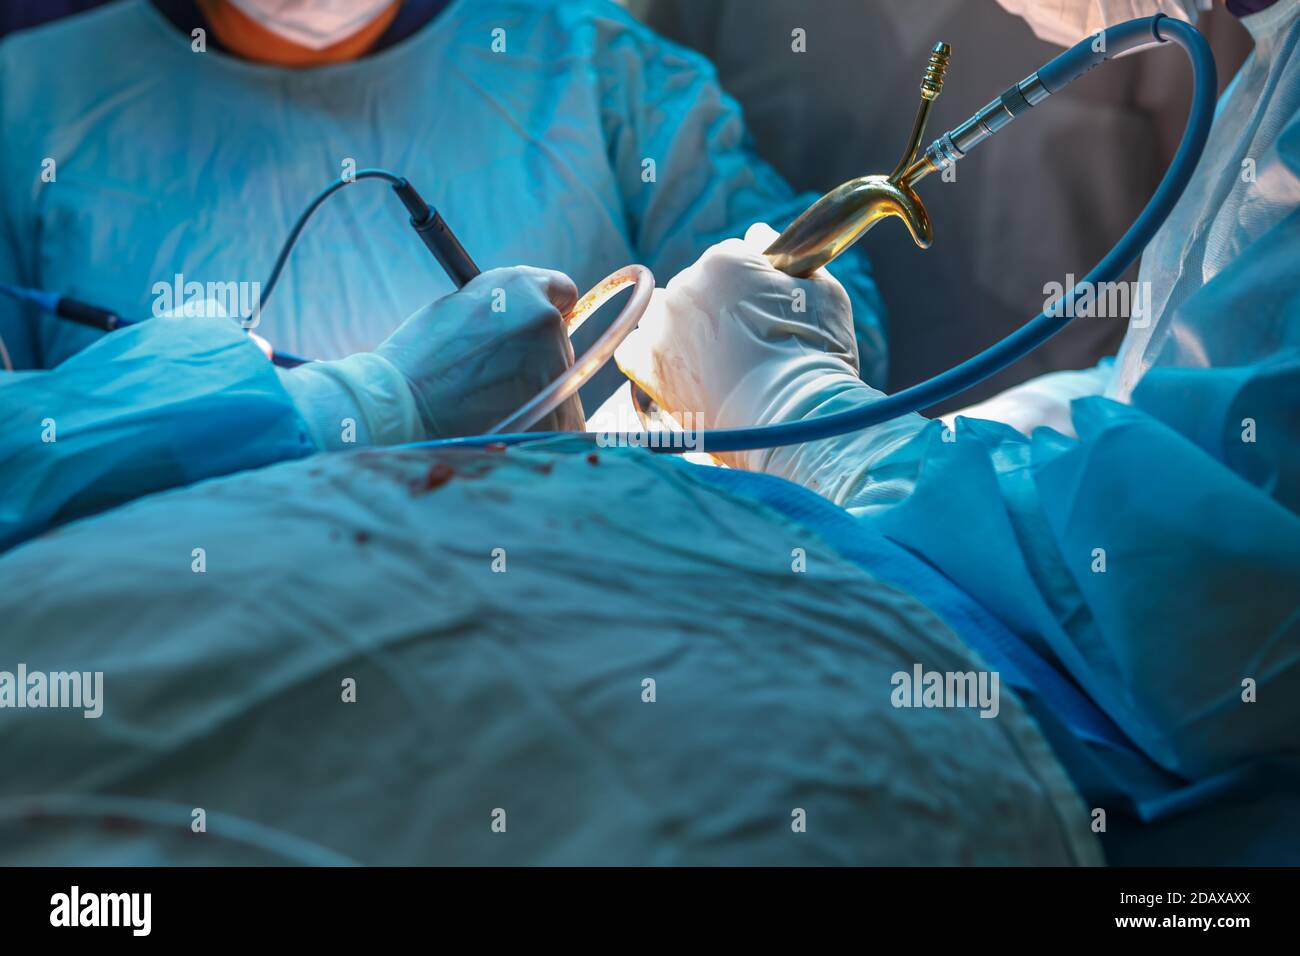 Surgeons hands with tools during surgery closeup Stock Photo